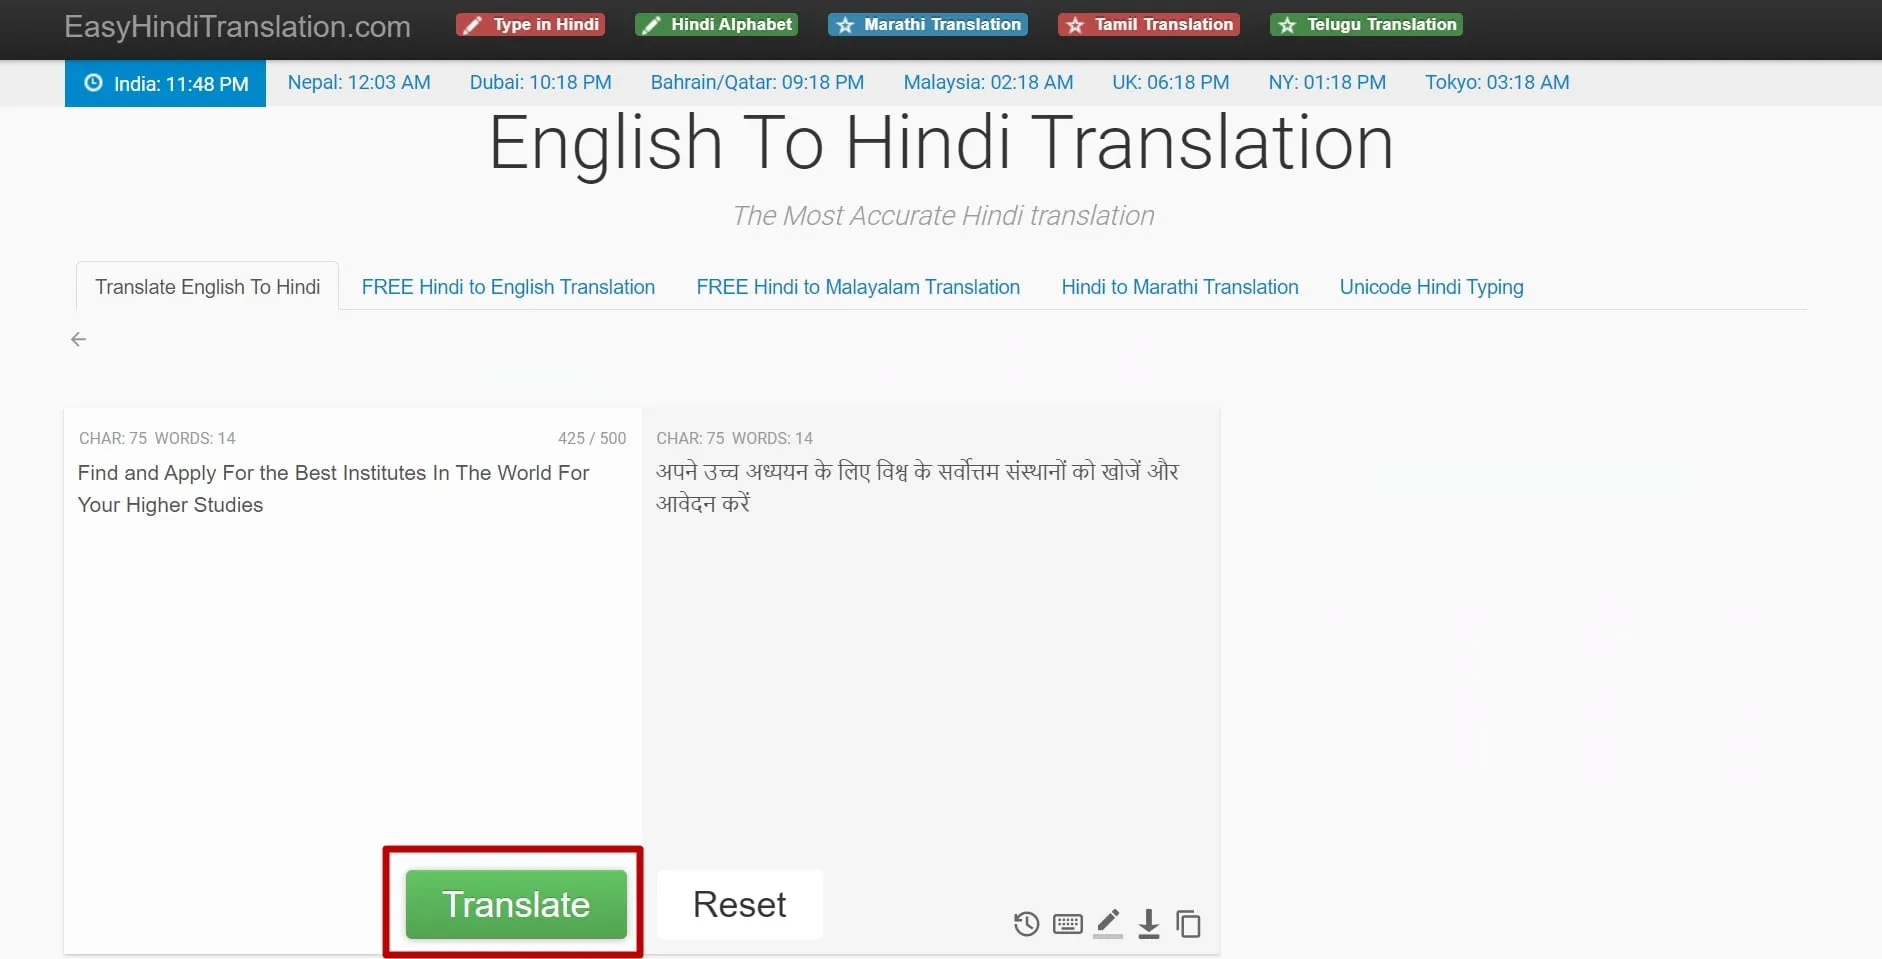 click the translate button